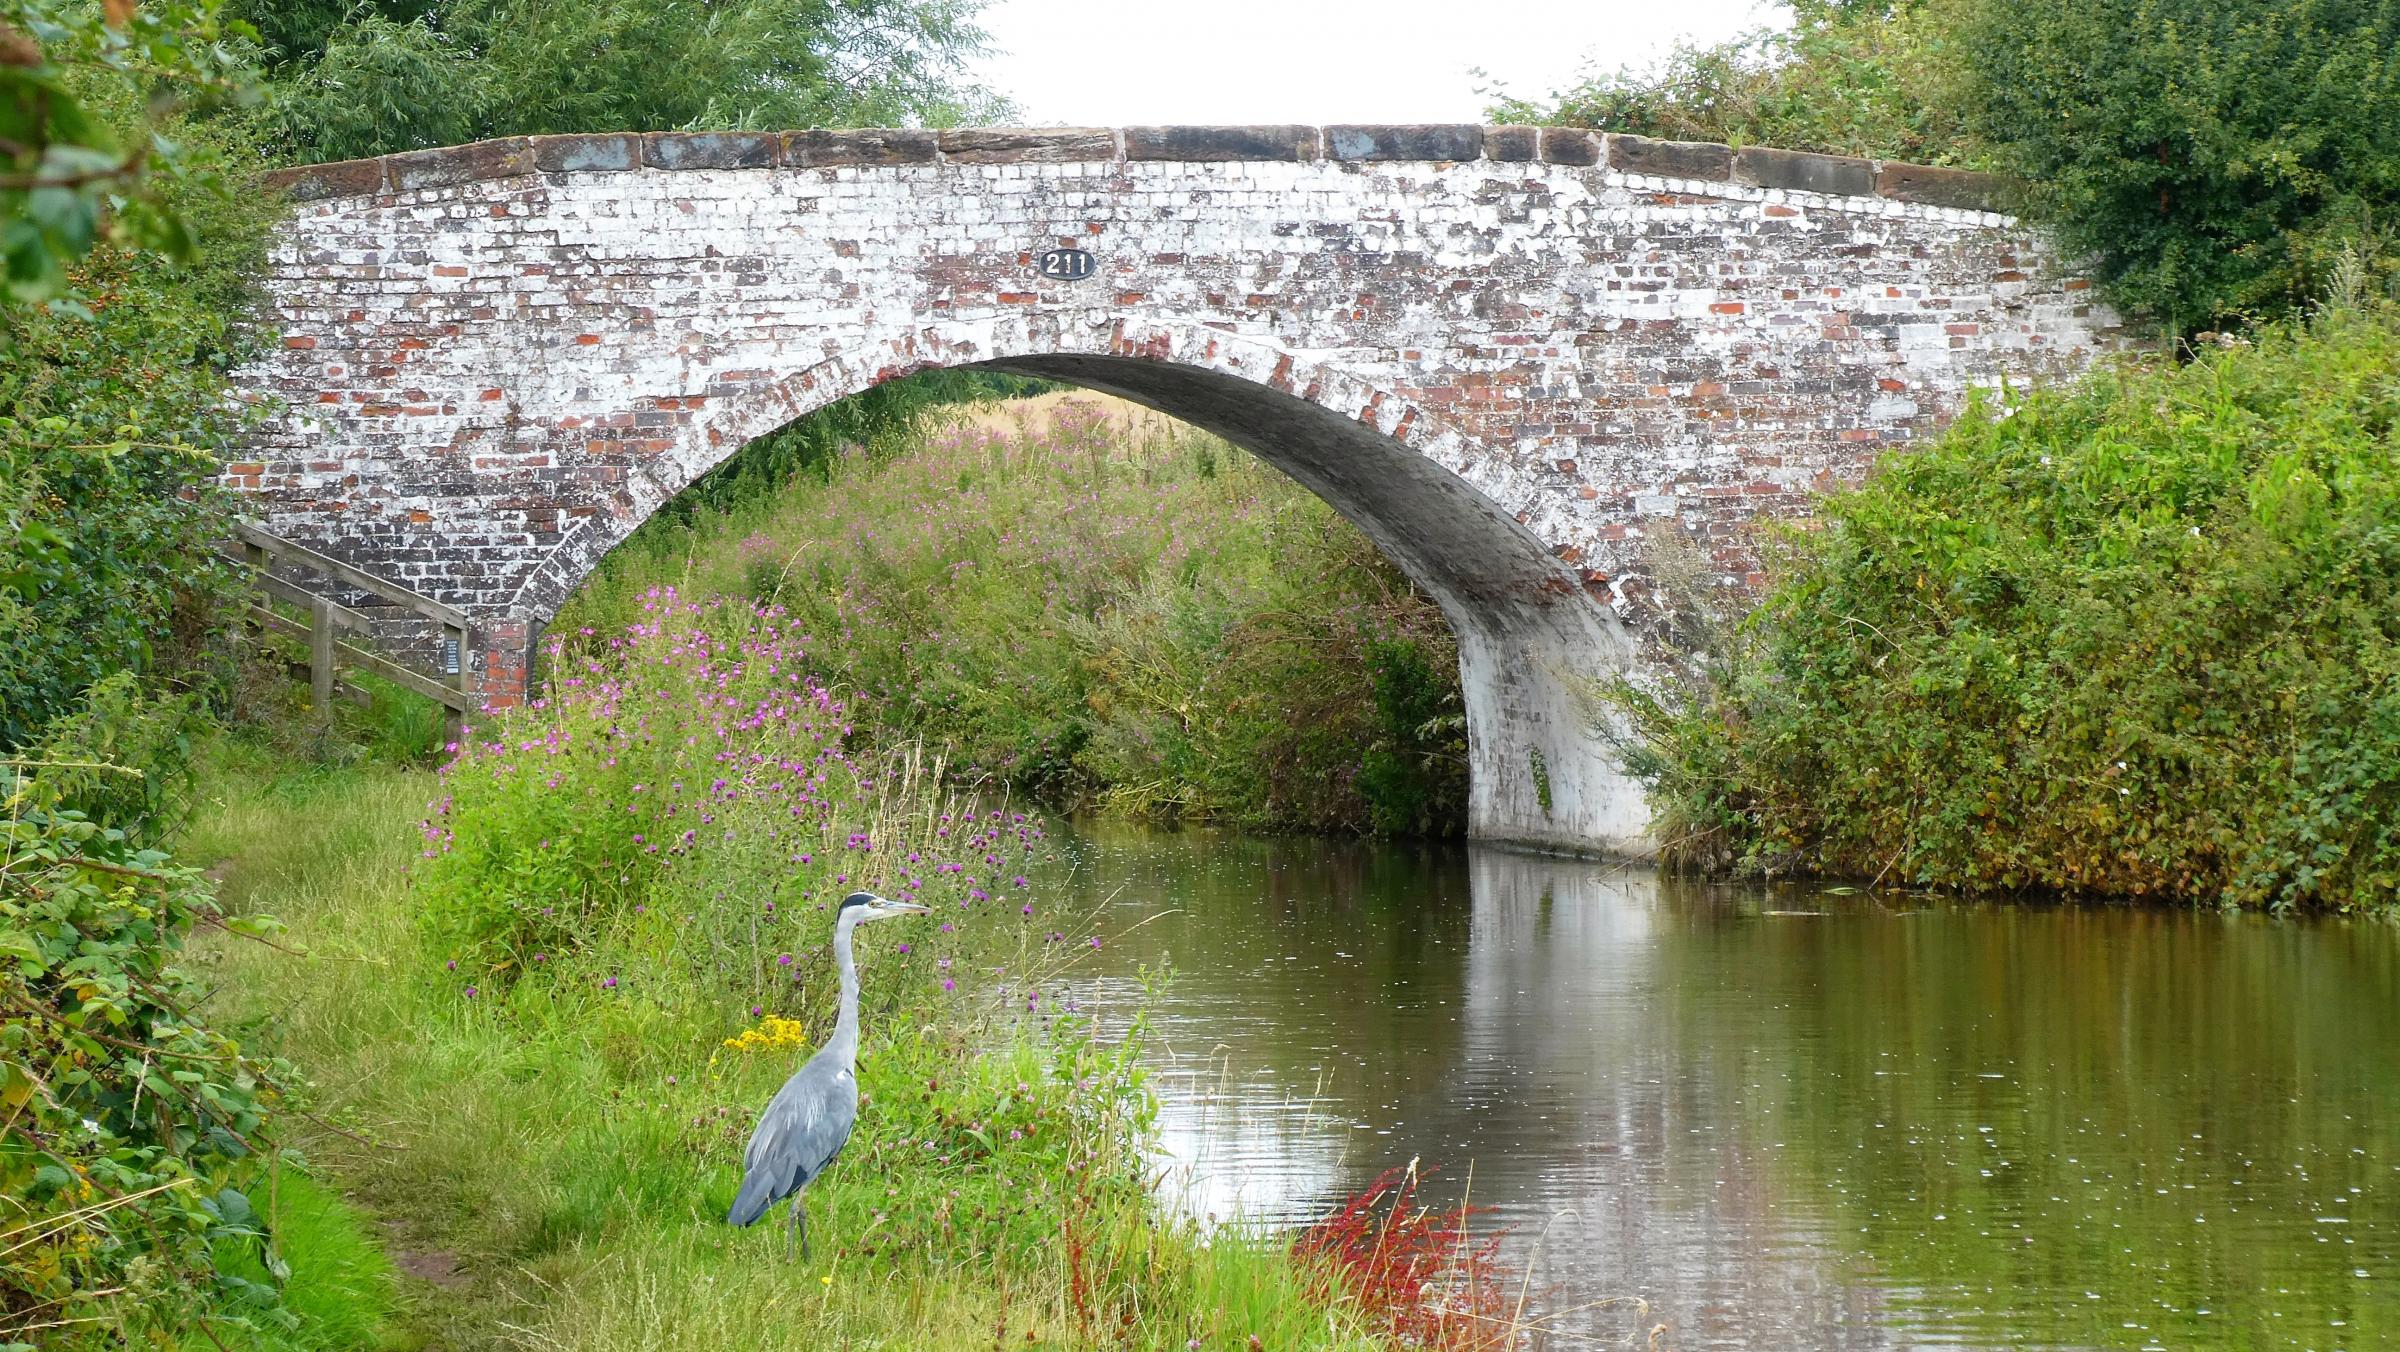 A heron sits waiting patiently by the Trent and Mersey Canal at Acton Bridge